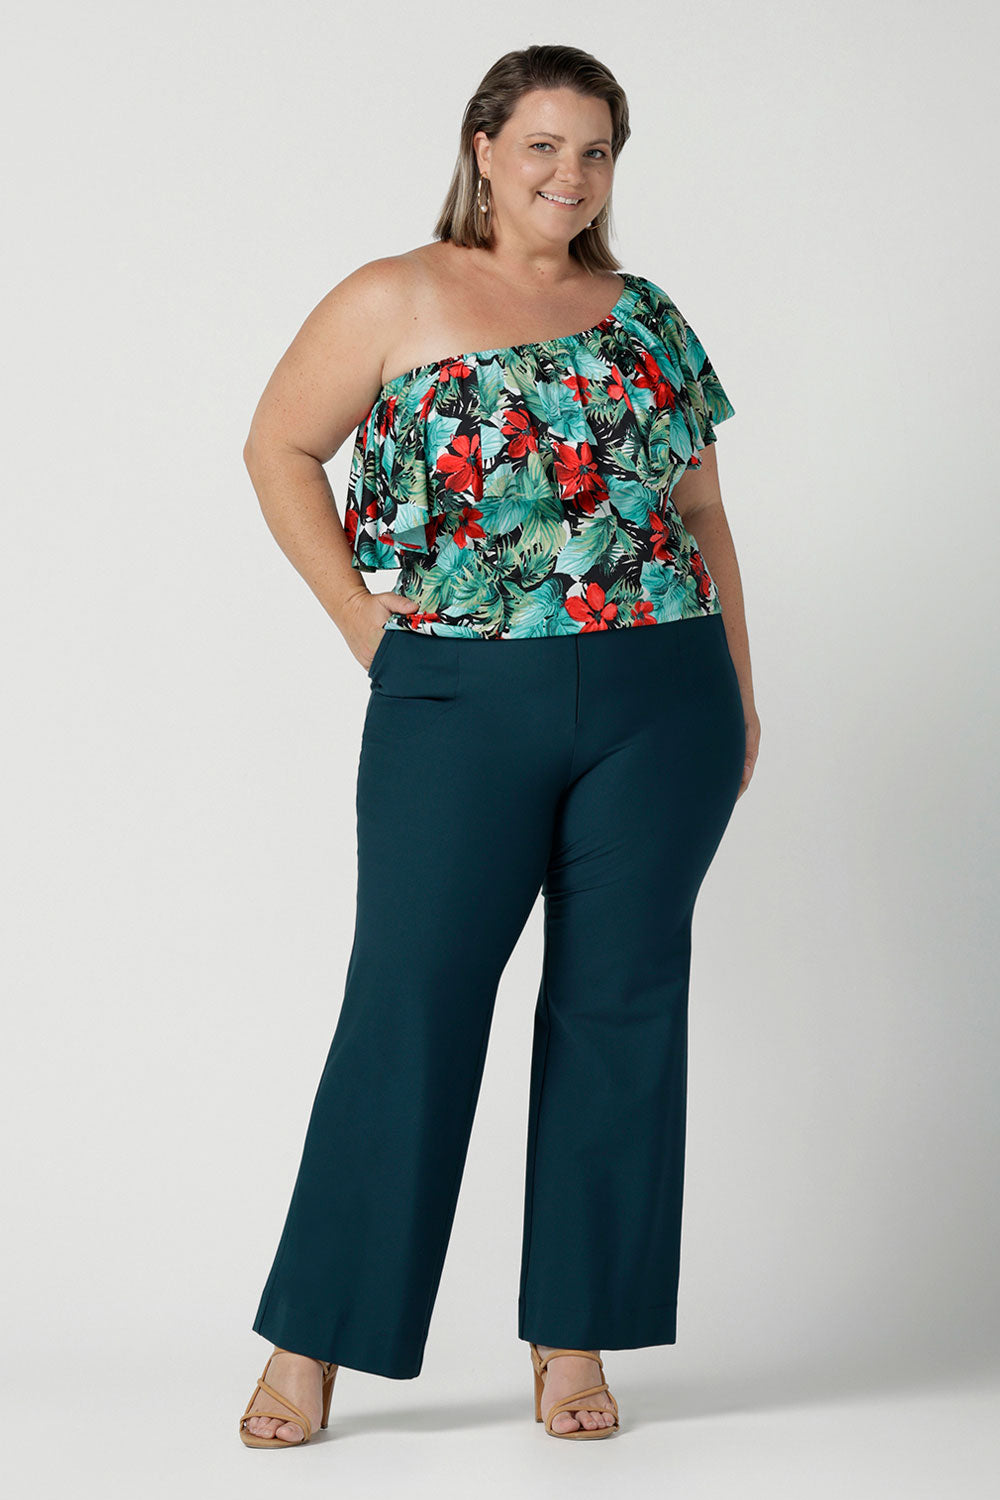 One shoulder Briar Top in Havana on a size 18 model. Tropical print design with red flowers and green palm leaf. Soft slinky jersey. Wear this top multiple ways one shoulder, off shoulder and on shoulder. Styled back with Brett pants in Petrol. Made in Australia for women size 8 - 24.